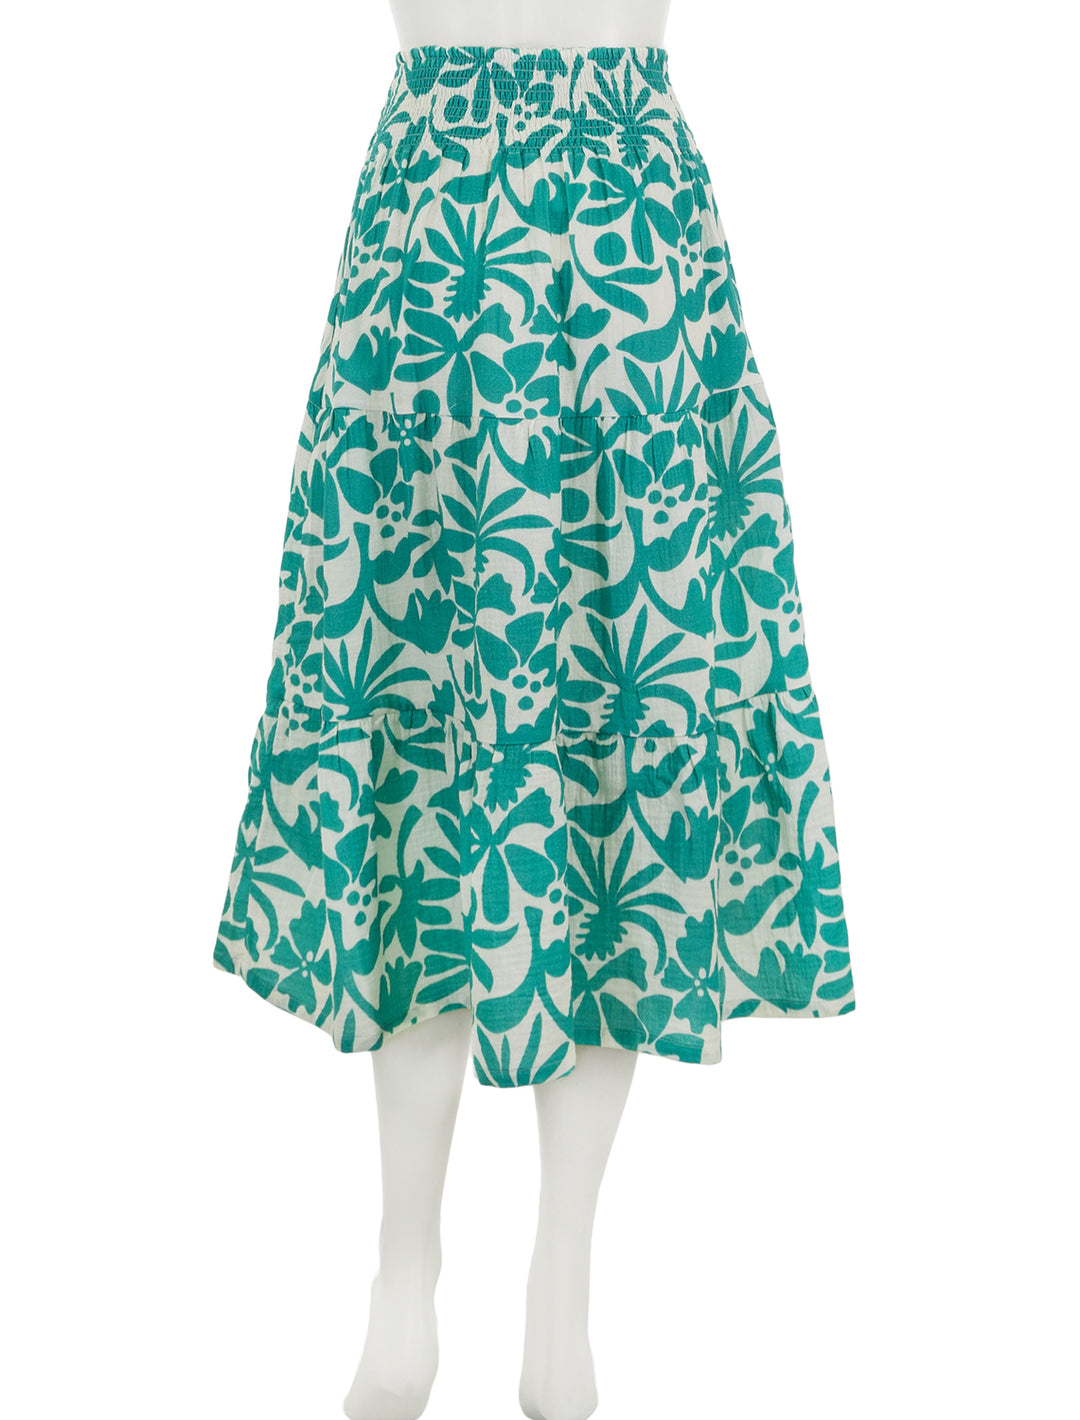 Back view of Marine Layer's corinne double cloth maxi skirt in spruce flora.